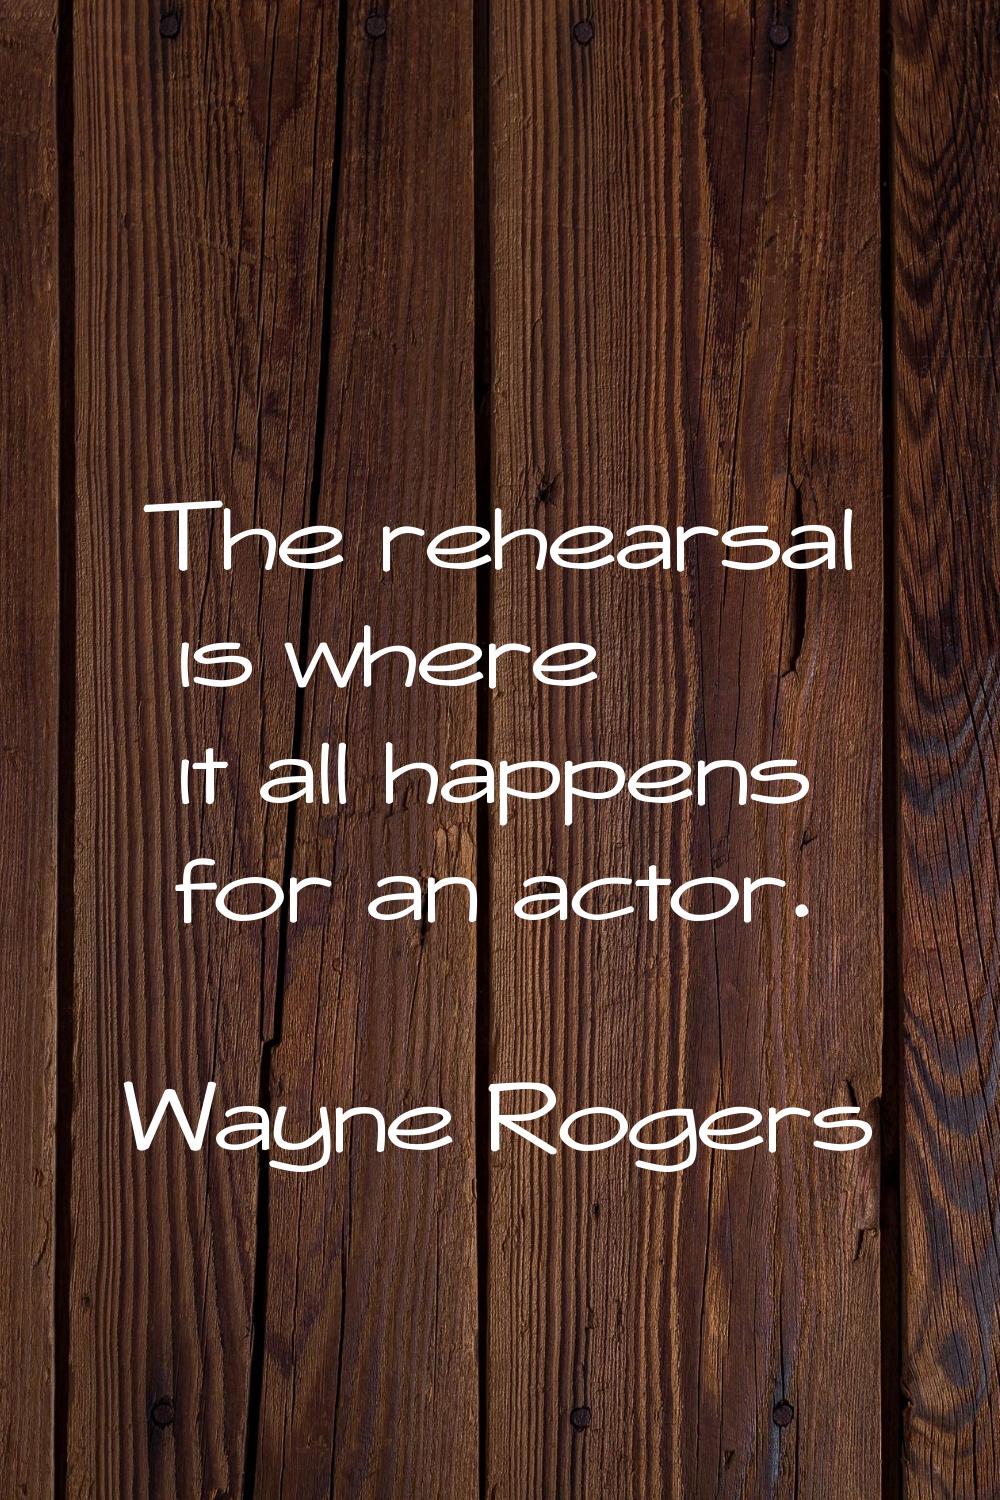 The rehearsal is where it all happens for an actor.